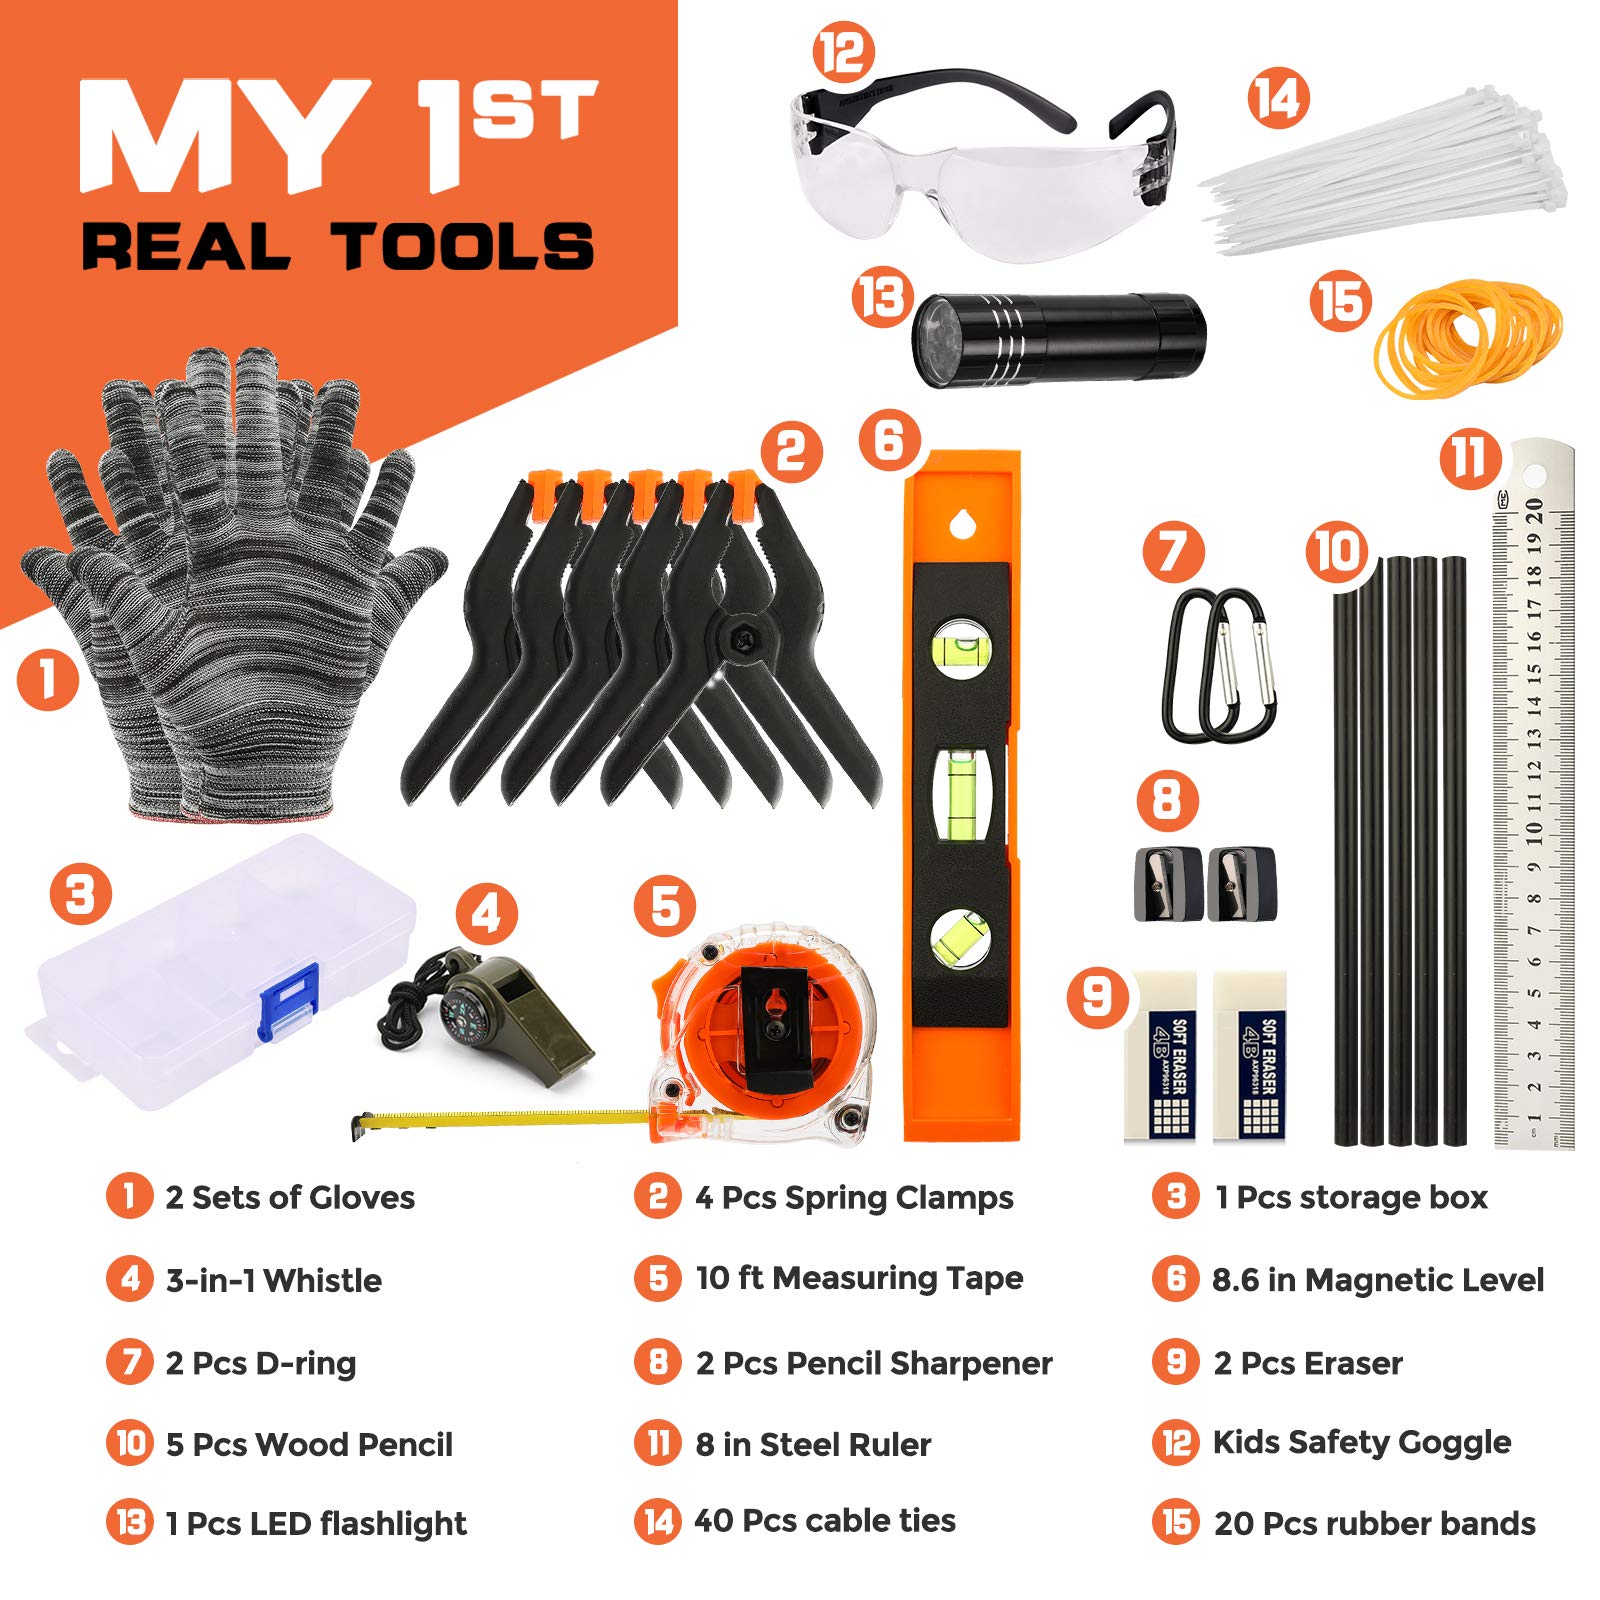 INCLY 95 PCS Kids Real Tool Set, Boys Small Real Hand Tools Kit, Children Construction Learning Tools Hammer Screwdriver for Home DIY Building and Woodworking,Come with Tool Belt & Bag